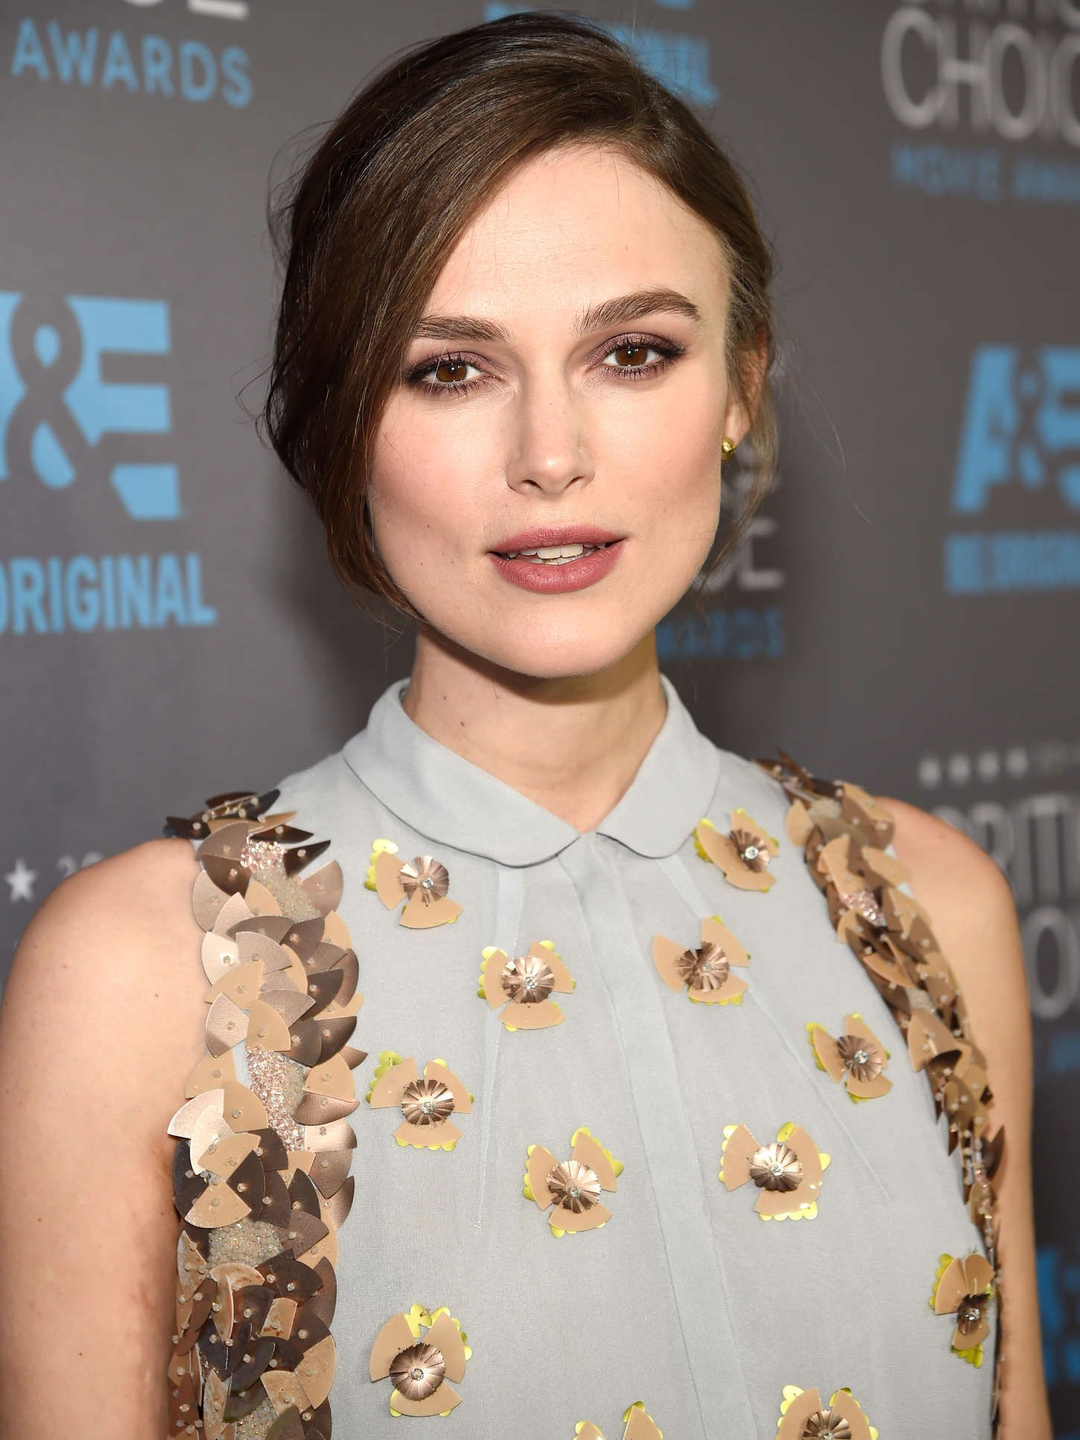 Keira Knightley current look